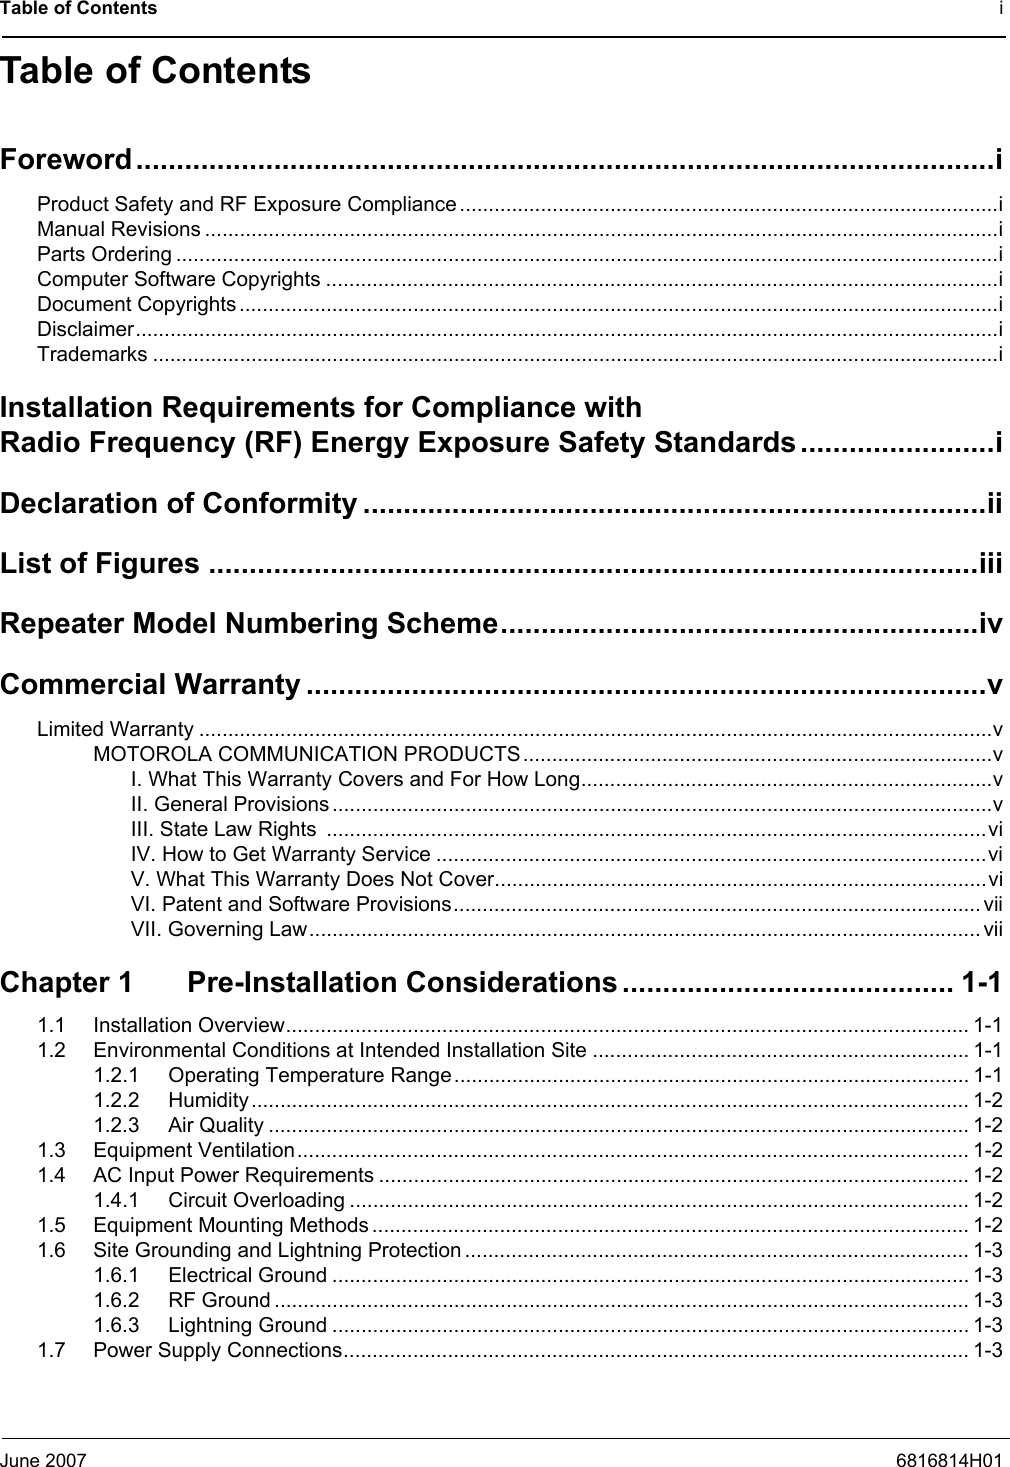 Table of Contents iJune 2007 6816814H01Table of ContentsForeword..........................................................................................................iProduct Safety and RF Exposure Compliance.............................................................................................iManual Revisions .........................................................................................................................................iParts Ordering ..............................................................................................................................................iComputer Software Copyrights ....................................................................................................................iDocument Copyrights...................................................................................................................................iDisclaimer.....................................................................................................................................................iTrademarks ..................................................................................................................................................iInstallation Requirements for Compliance with Radio Frequency (RF) Energy Exposure Safety Standards........................iDeclaration of Conformity .............................................................................iiList of Figures ...............................................................................................iiiRepeater Model Numbering Scheme...........................................................ivCommercial Warranty ....................................................................................vLimited Warranty .........................................................................................................................................vMOTOROLA COMMUNICATION PRODUCTS.................................................................................vI. What This Warranty Covers and For How Long.......................................................................vII. General Provisions ..................................................................................................................vIII. State Law Rights  ..................................................................................................................viIV. How to Get Warranty Service ...............................................................................................viV. What This Warranty Does Not Cover.....................................................................................viVI. Patent and Software Provisions...........................................................................................viiVII. Governing Law....................................................................................................................viiChapter 1 Pre-Installation Considerations......................................... 1-11.1 Installation Overview...................................................................................................................... 1-11.2 Environmental Conditions at Intended Installation Site ................................................................. 1-11.2.1 Operating Temperature Range......................................................................................... 1-11.2.2 Humidity............................................................................................................................ 1-21.2.3 Air Quality ......................................................................................................................... 1-21.3 Equipment Ventilation.................................................................................................................... 1-21.4 AC Input Power Requirements ...................................................................................................... 1-21.4.1 Circuit Overloading ........................................................................................................... 1-21.5 Equipment Mounting Methods ....................................................................................................... 1-21.6 Site Grounding and Lightning Protection ....................................................................................... 1-31.6.1 Electrical Ground .............................................................................................................. 1-31.6.2 RF Ground ........................................................................................................................ 1-31.6.3 Lightning Ground .............................................................................................................. 1-31.7 Power Supply Connections............................................................................................................ 1-3